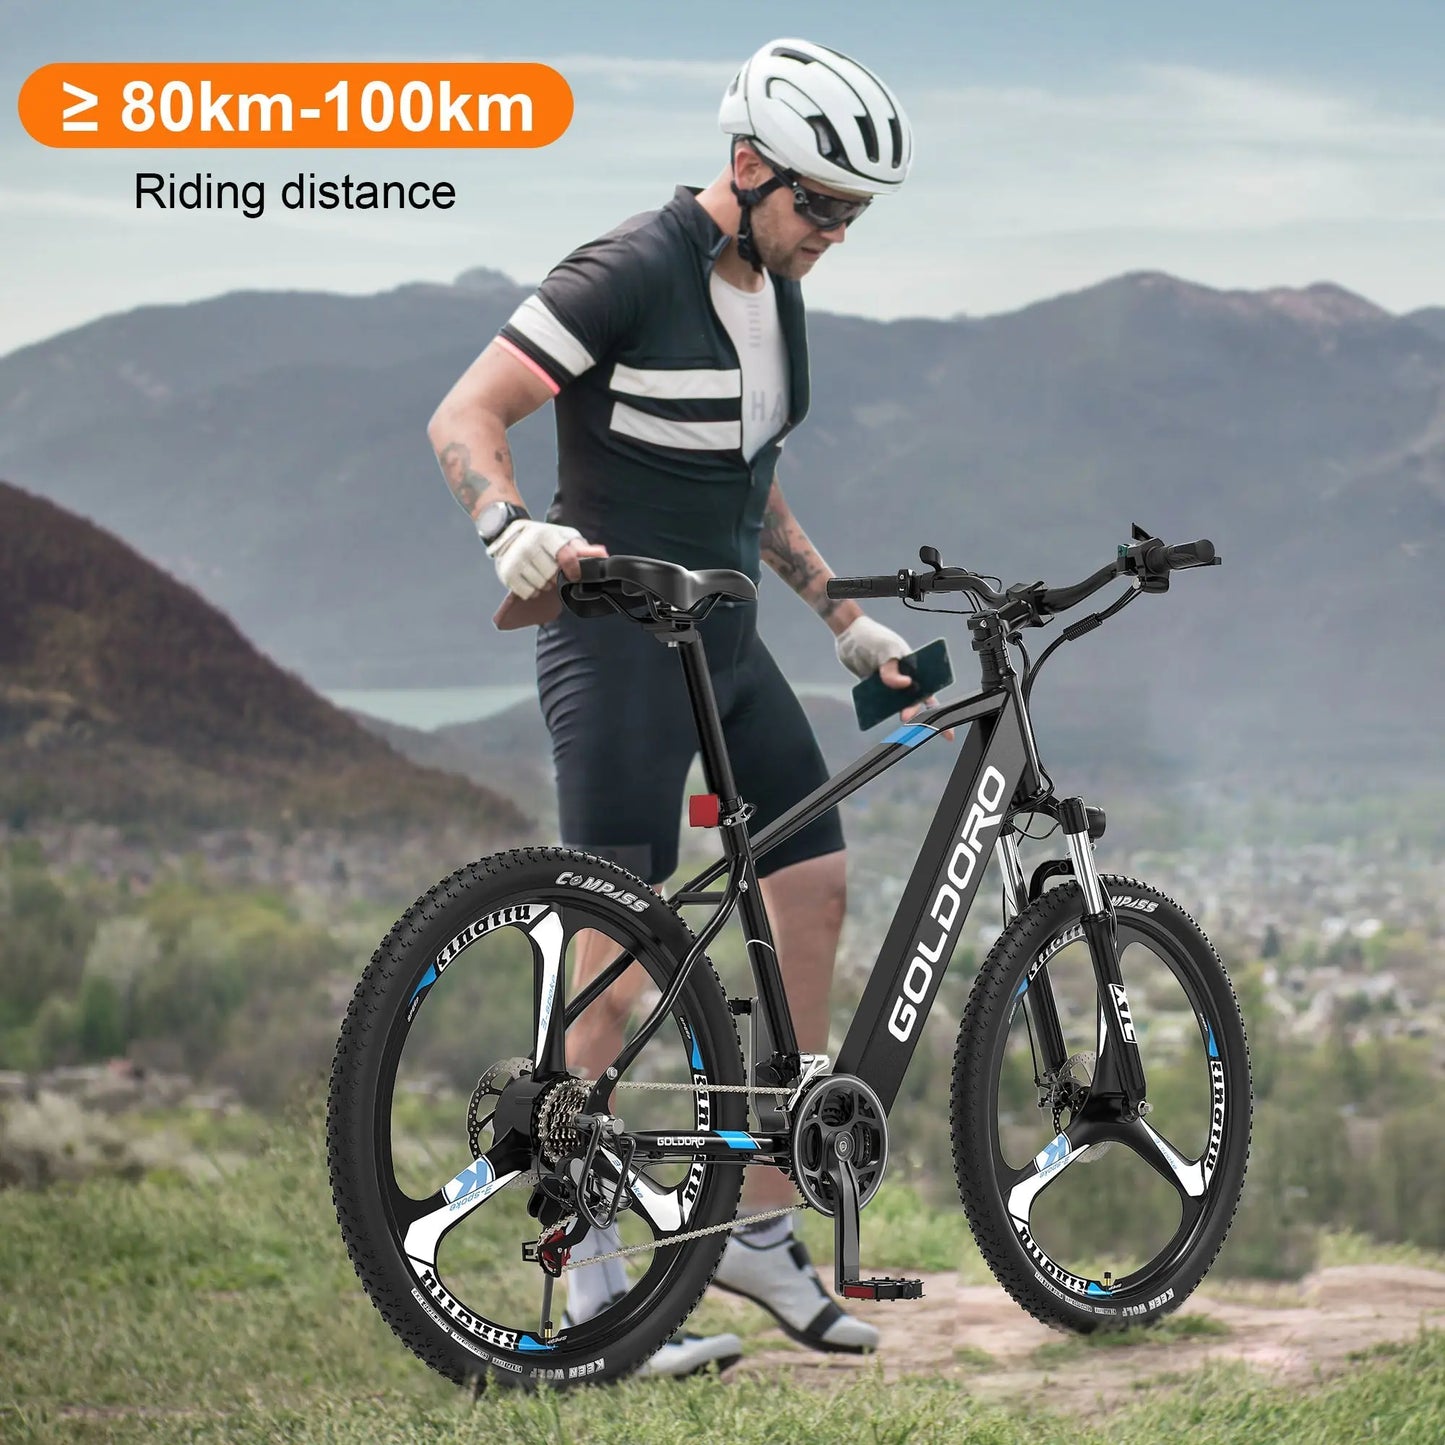 Goldoro Electric Bike 26" X7 Aluminum Alloy Mountain Bike, 250W/36V, MAX 18 MPH, 21 speed with Alloy Wheels